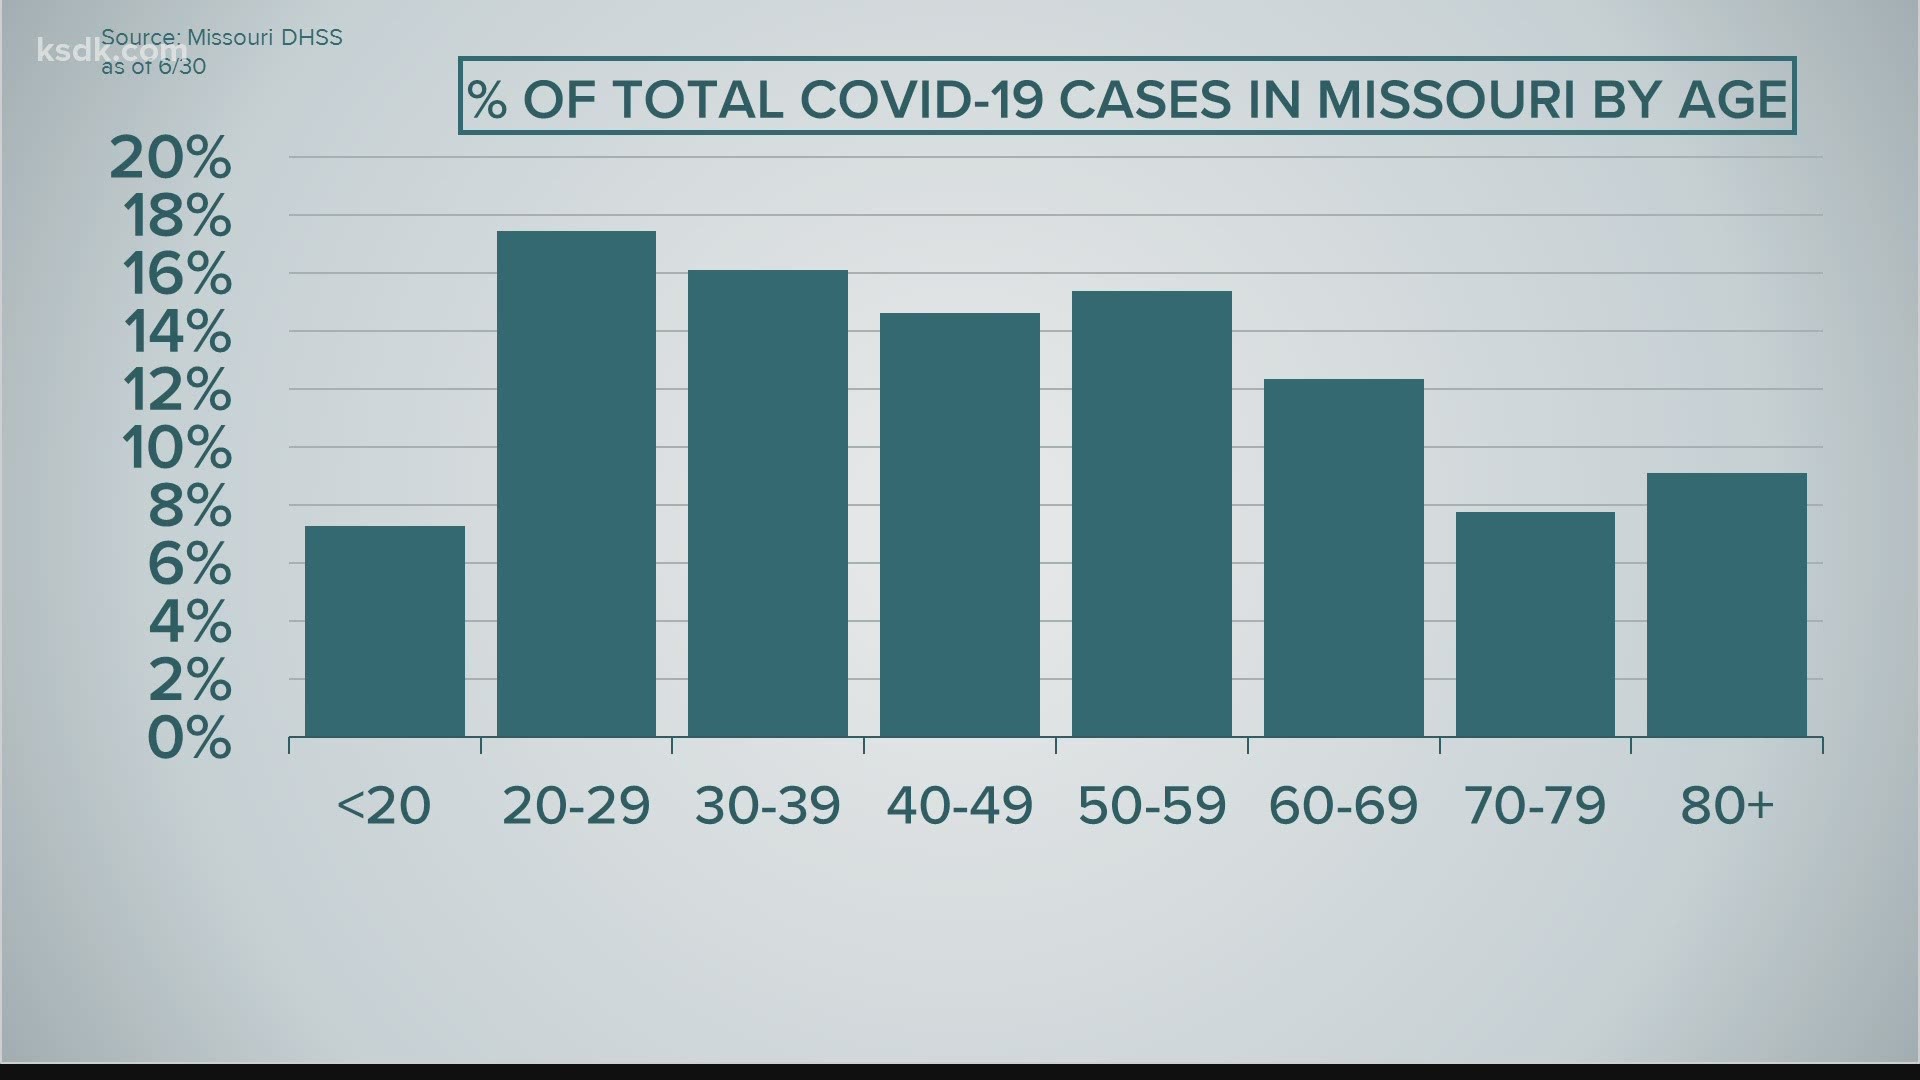 Currently, Missourians in their 20s make up the largest percentage of COVID-19 cases.